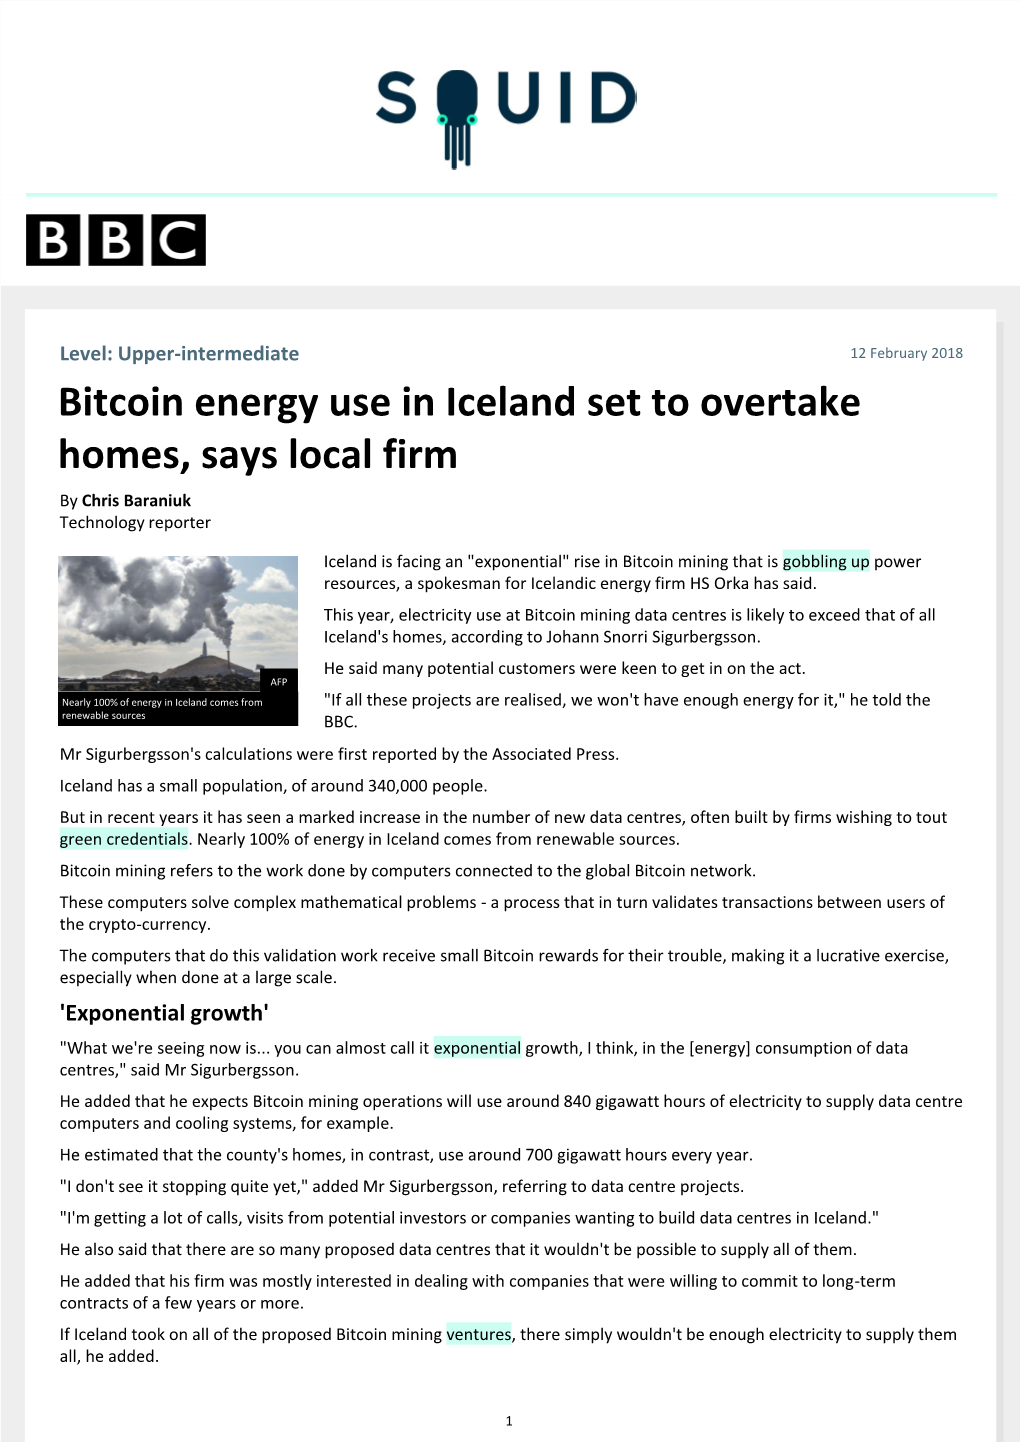 Bitcoin Energy Use in Iceland Set to Overtake Homes, Says Local Firm by Chris Baraniuk Technology Reporter